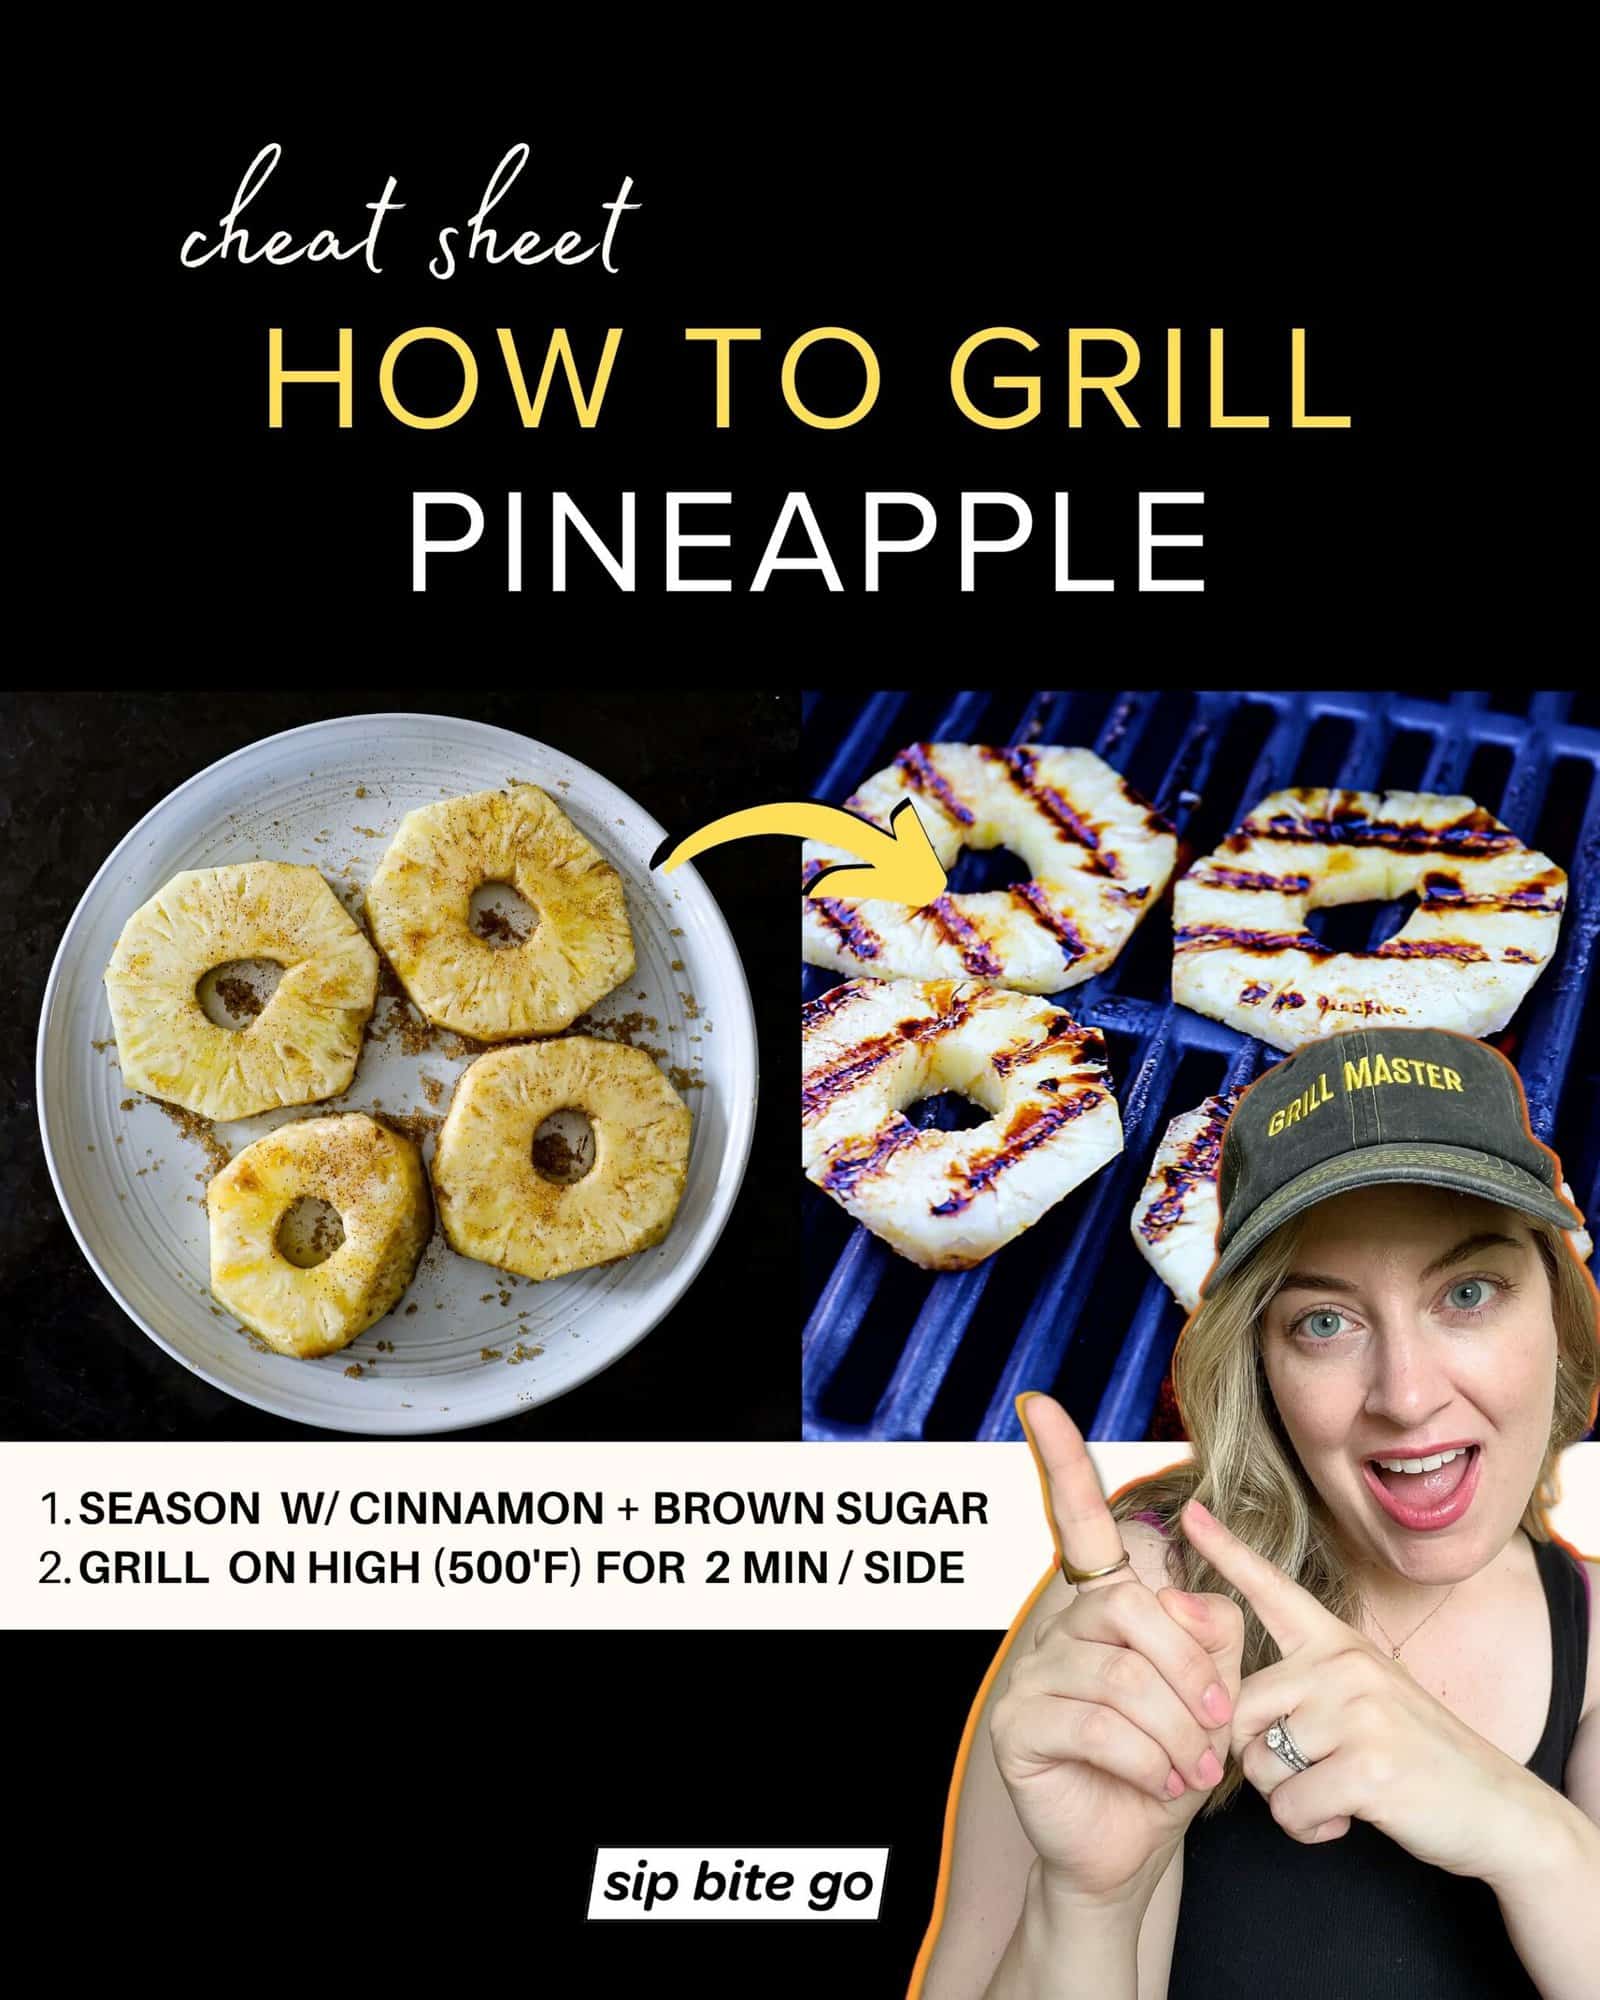 Infographic with recipe steps for grilling pineapple slices with captions